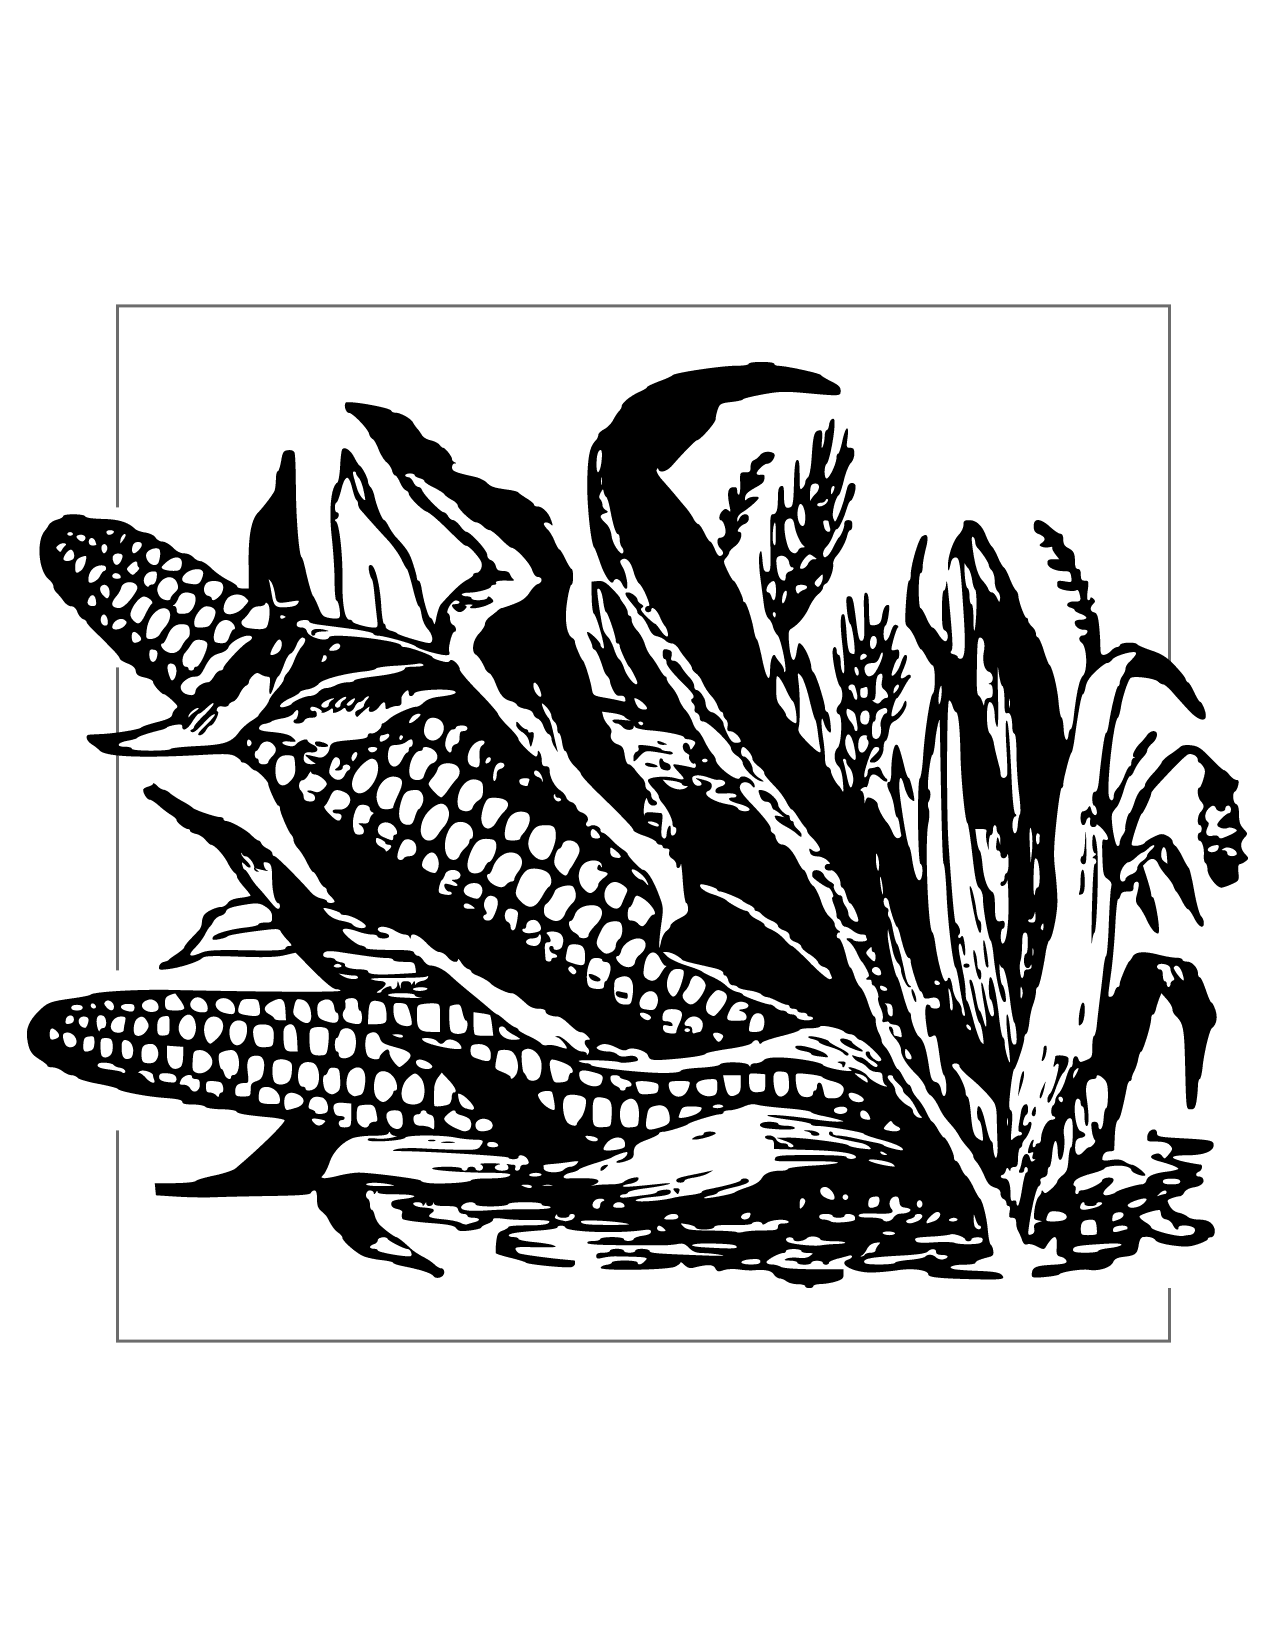 Corn Harvest Coloring Page